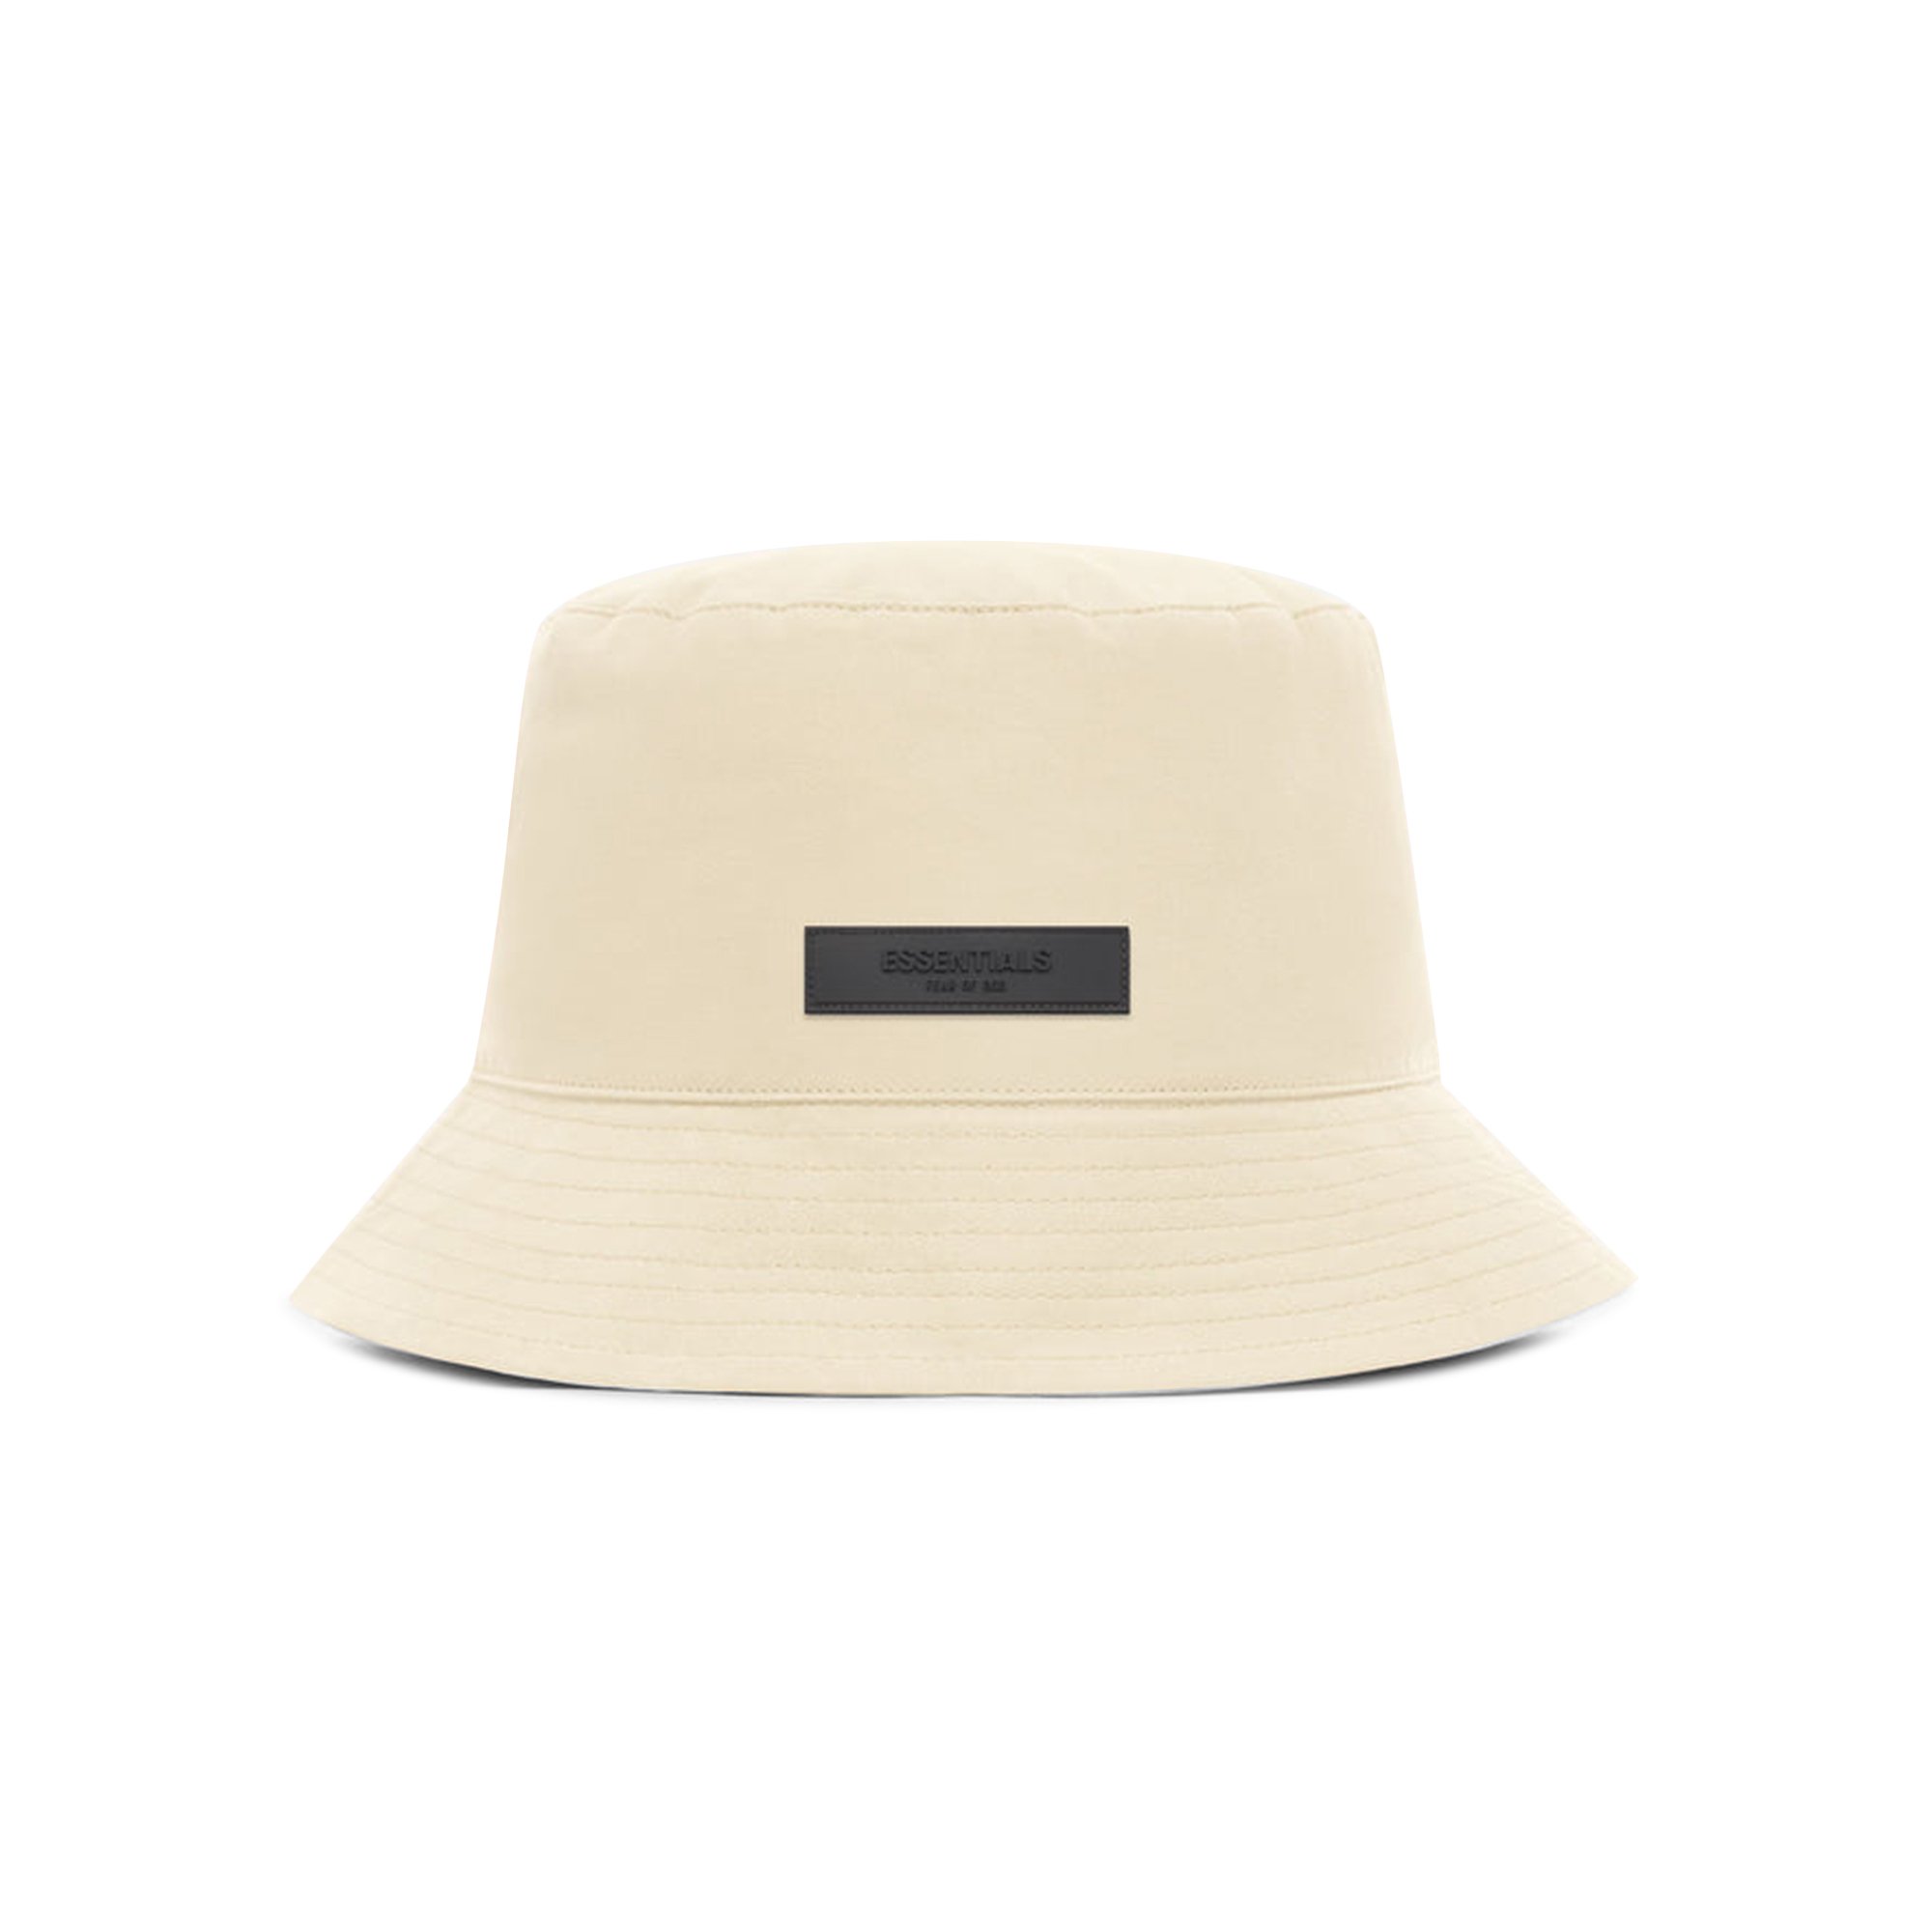 Панама-ведро Fear of God Essentials, Яичная скорлупа new tropical banana tree and cashew flower pattern fisherman hat ins men and women outdoor double sided sun hat bucket hat